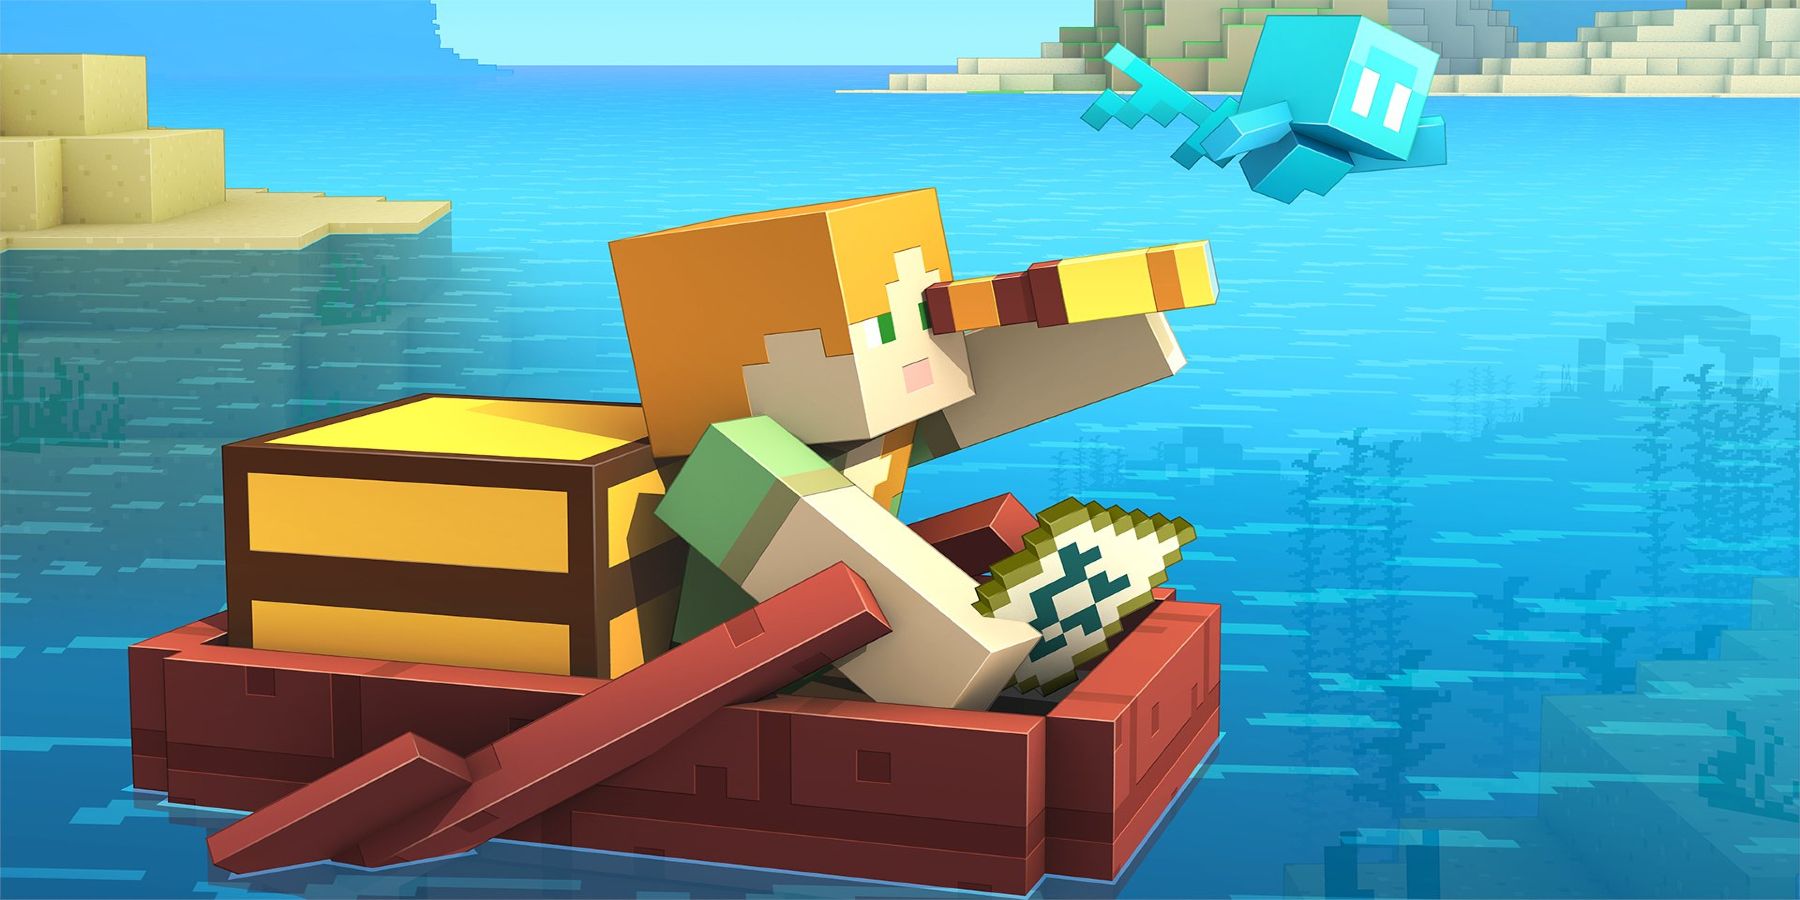 Minecraft's Alex in a boat with a chest, holding a map and amber spyglass as it sails the ocean with an allay.